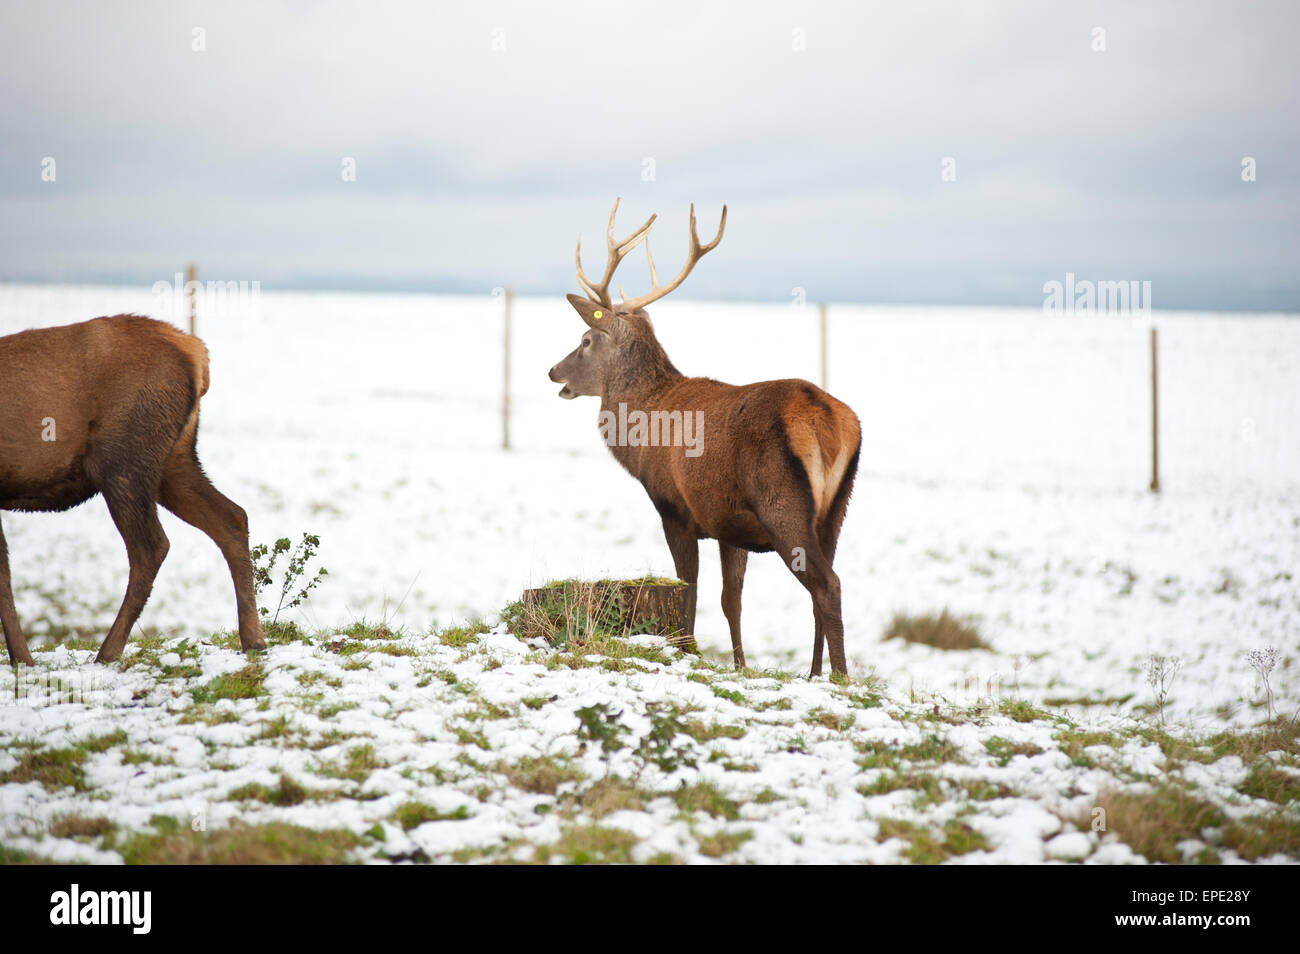 Deer with antlers in the snow Stock Photo